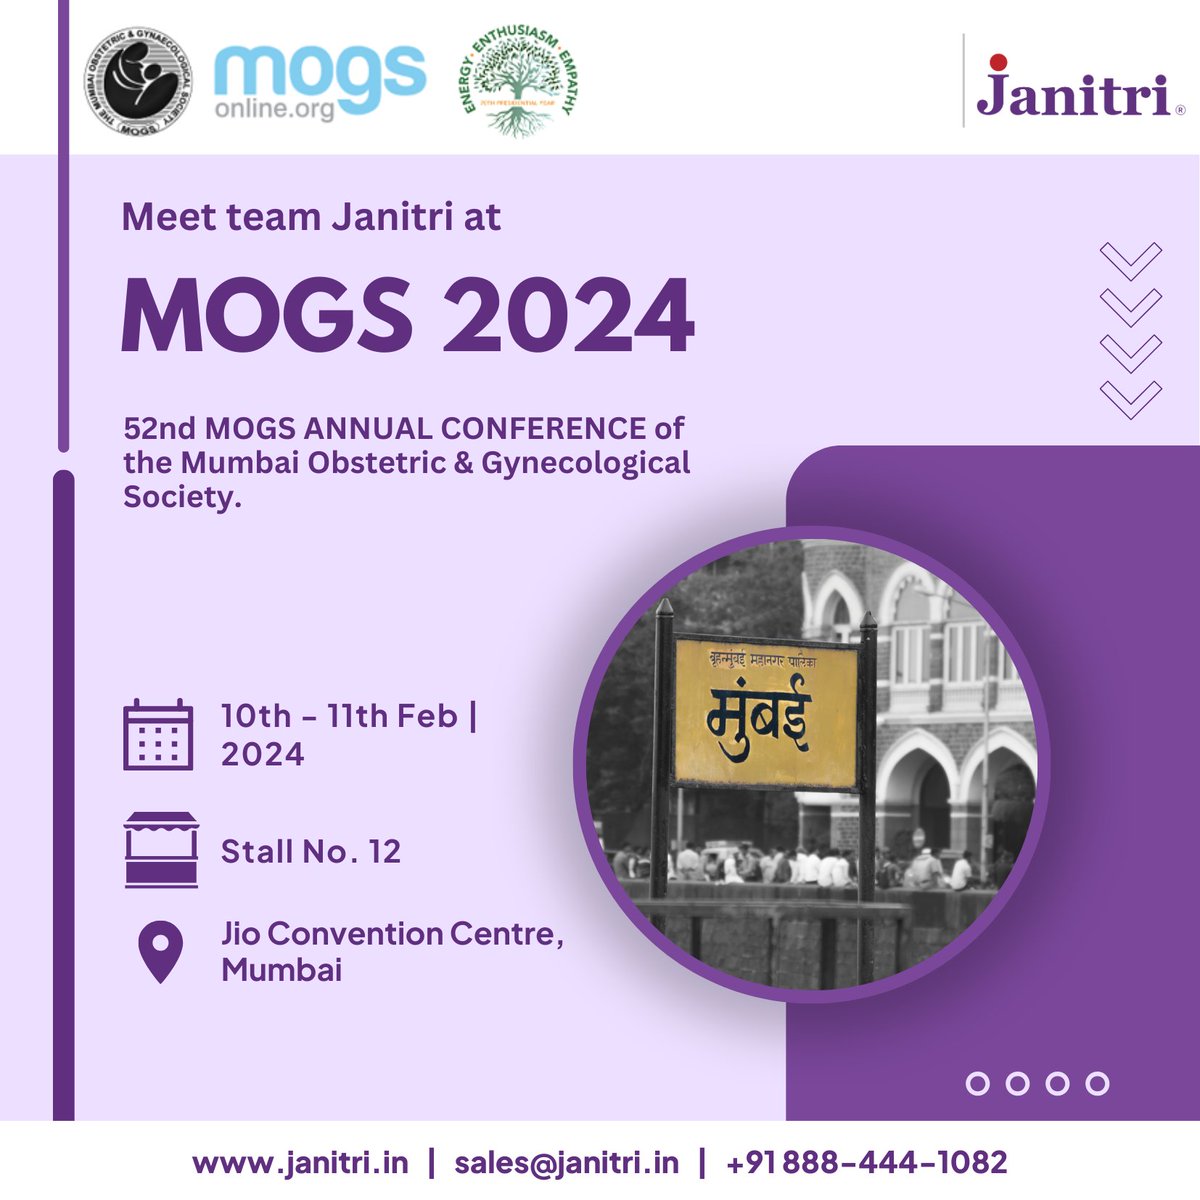 Janitri will be there at 52nd MOGS ANNUAL CONFERENCE of the Mumbai Obstetric & Gynecological Society. Join us as we gather to explore the groundbreaking advancements in emerging technologies within the field of maternal healthcare. #Mumbai #Gynaecology #Healthcare #MOGS